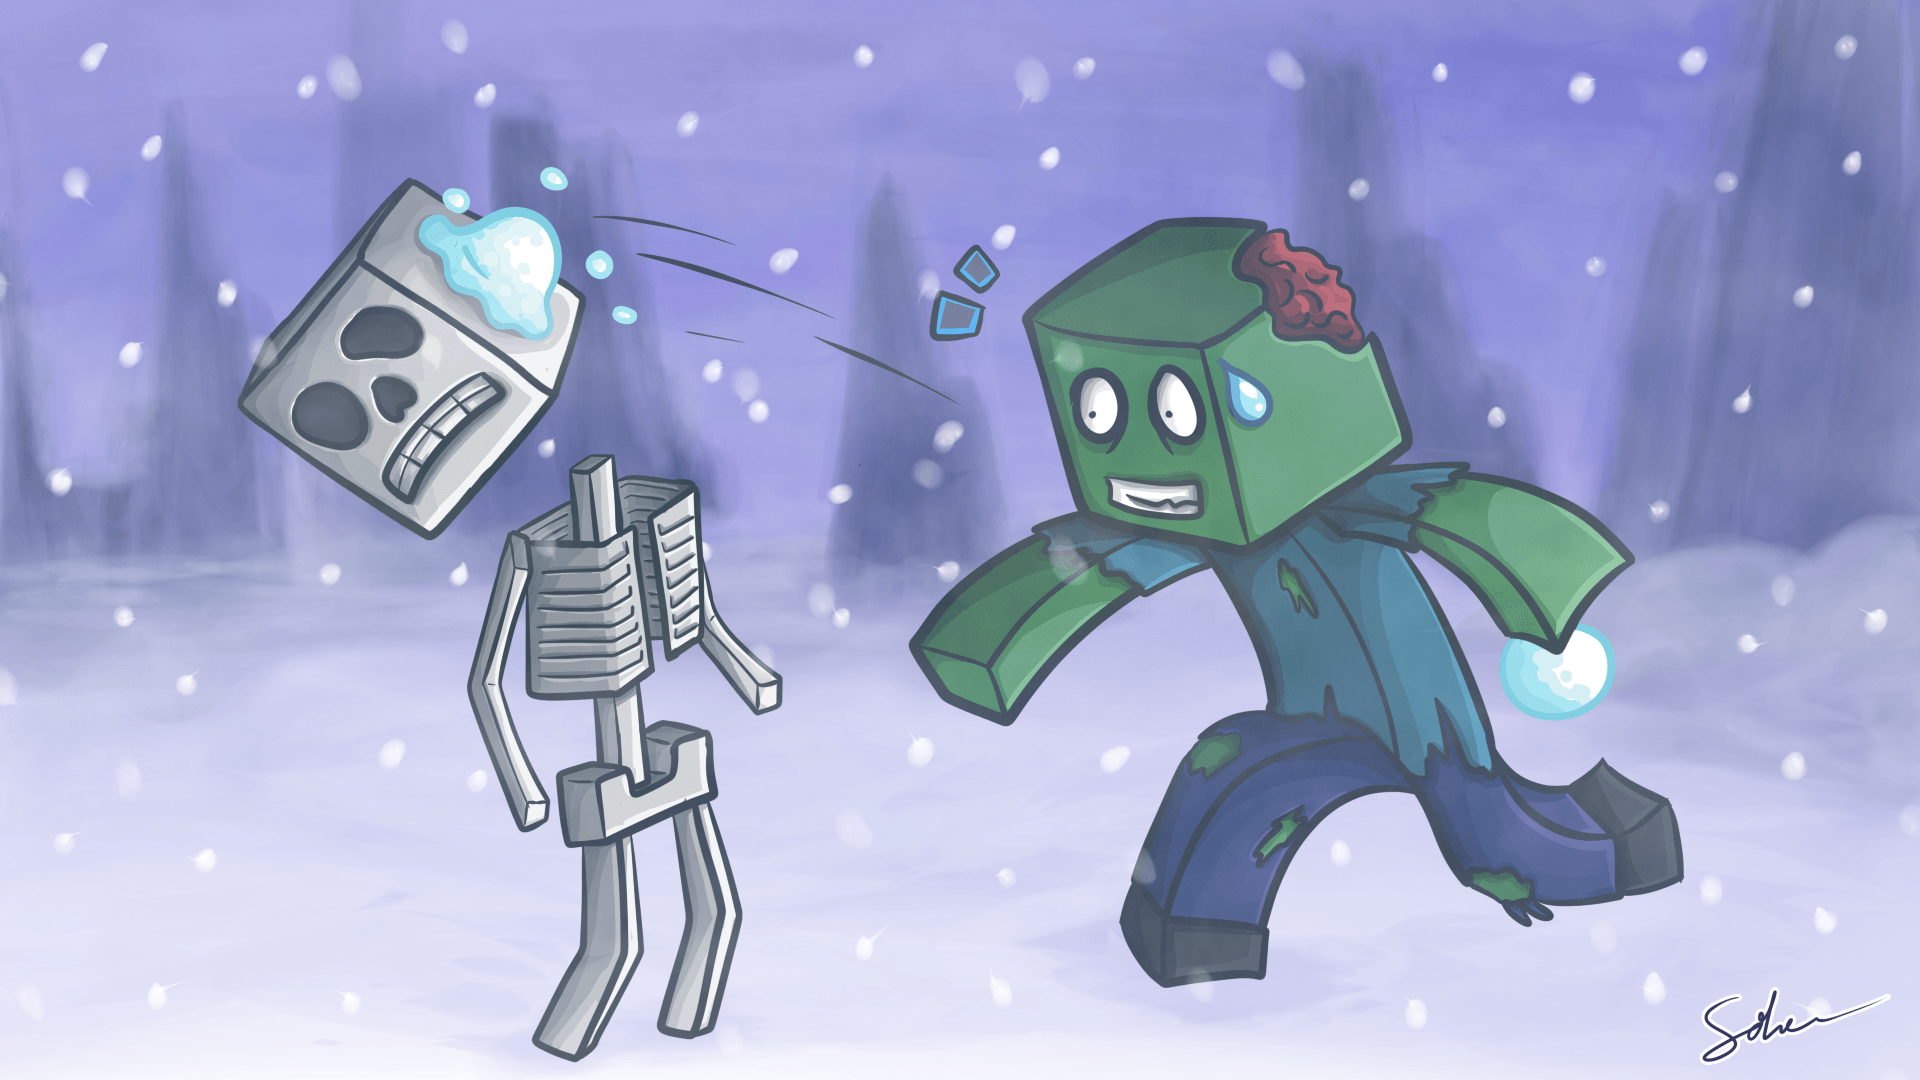 minecraft_snowball_fight_by_goldsolace-d5oe240